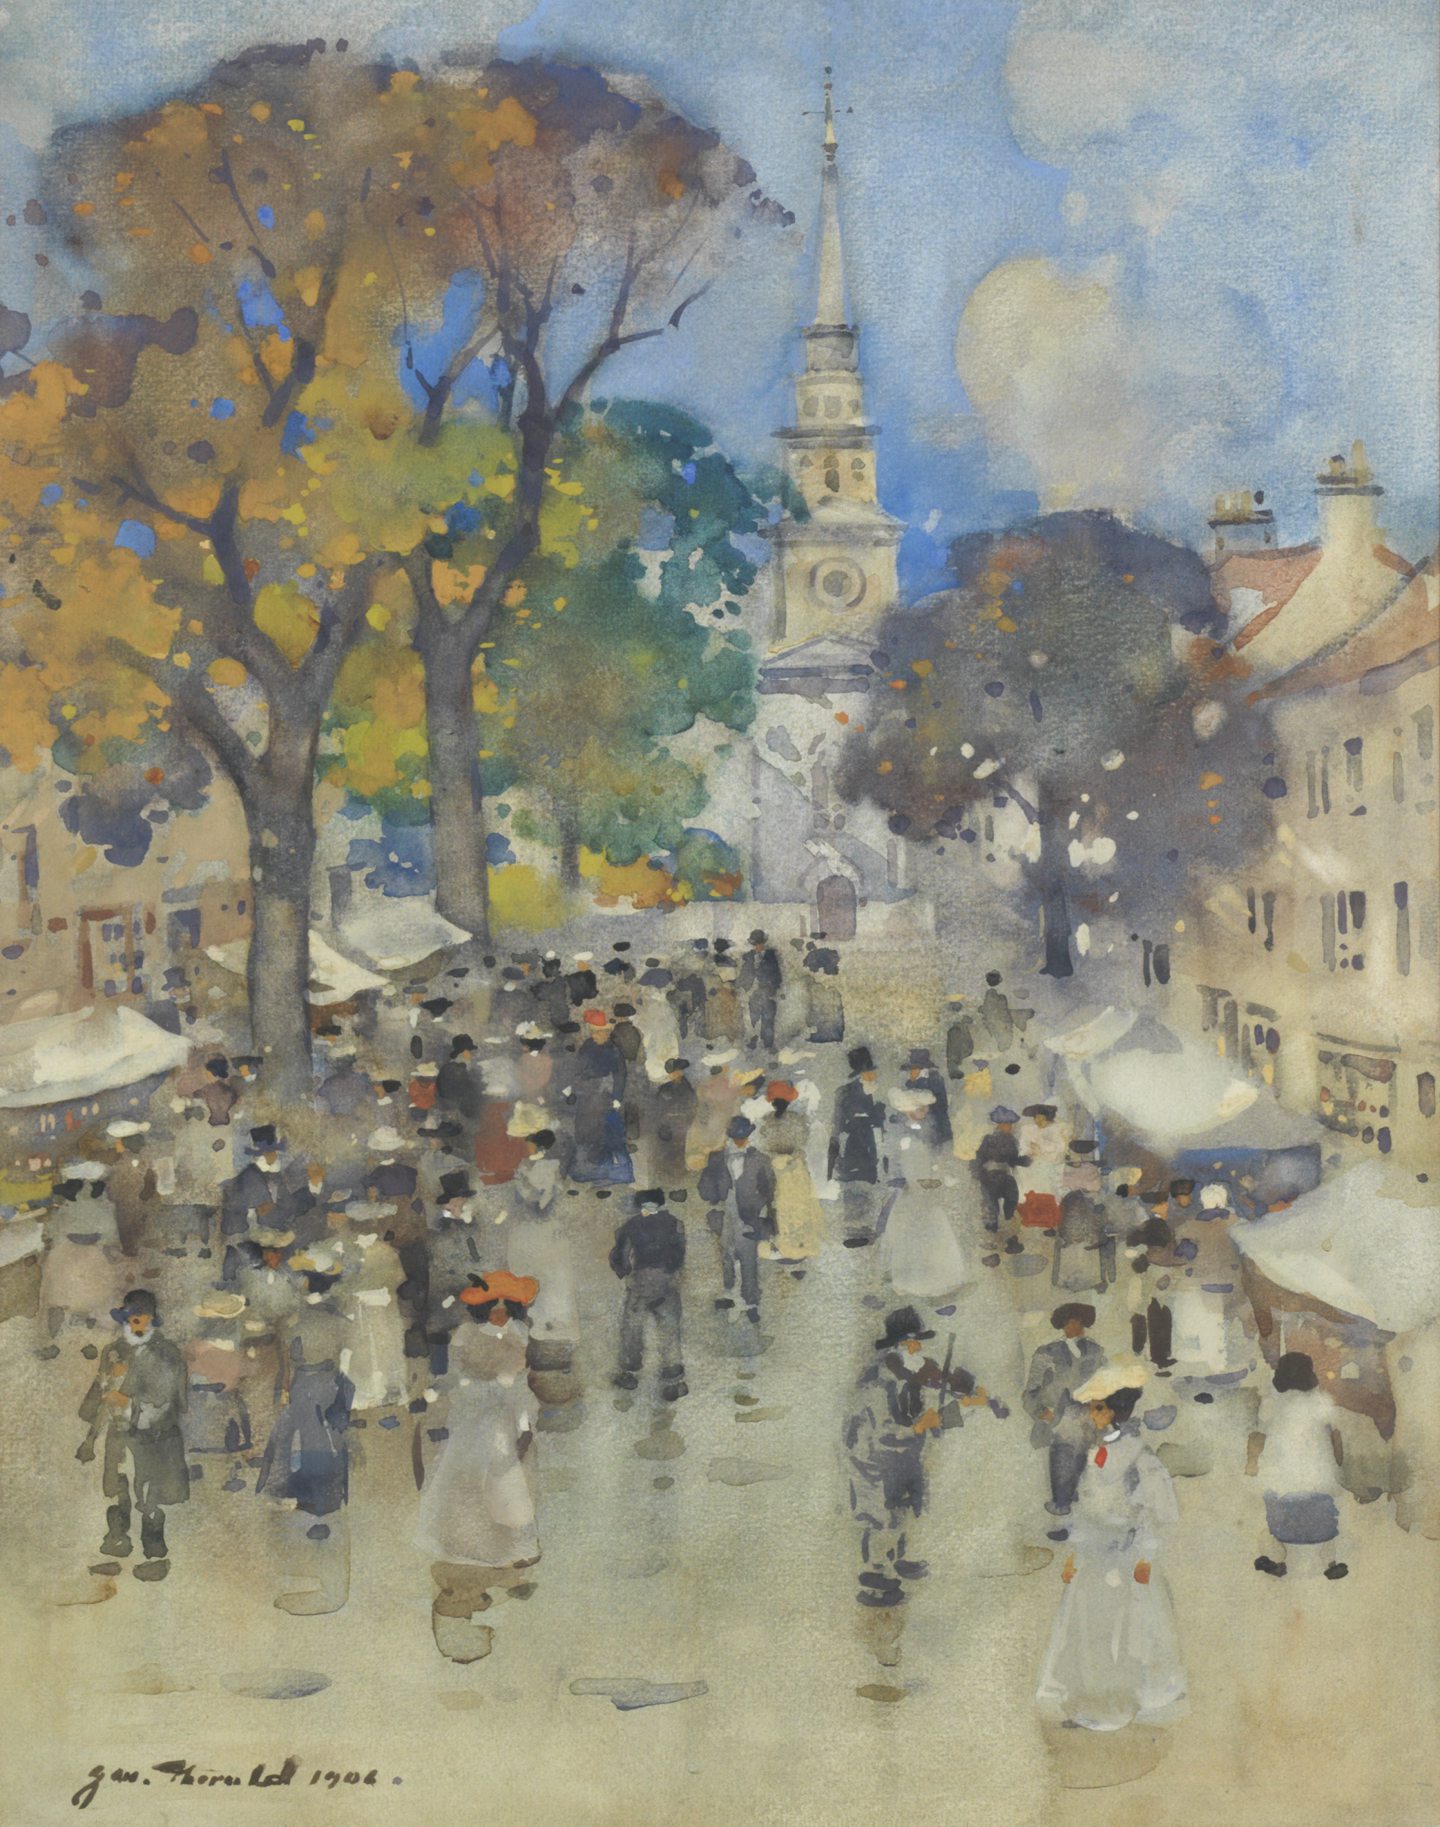 A Street Fair by James Watterson Herald sold for more than £12,000. Supplied by Bonhams.